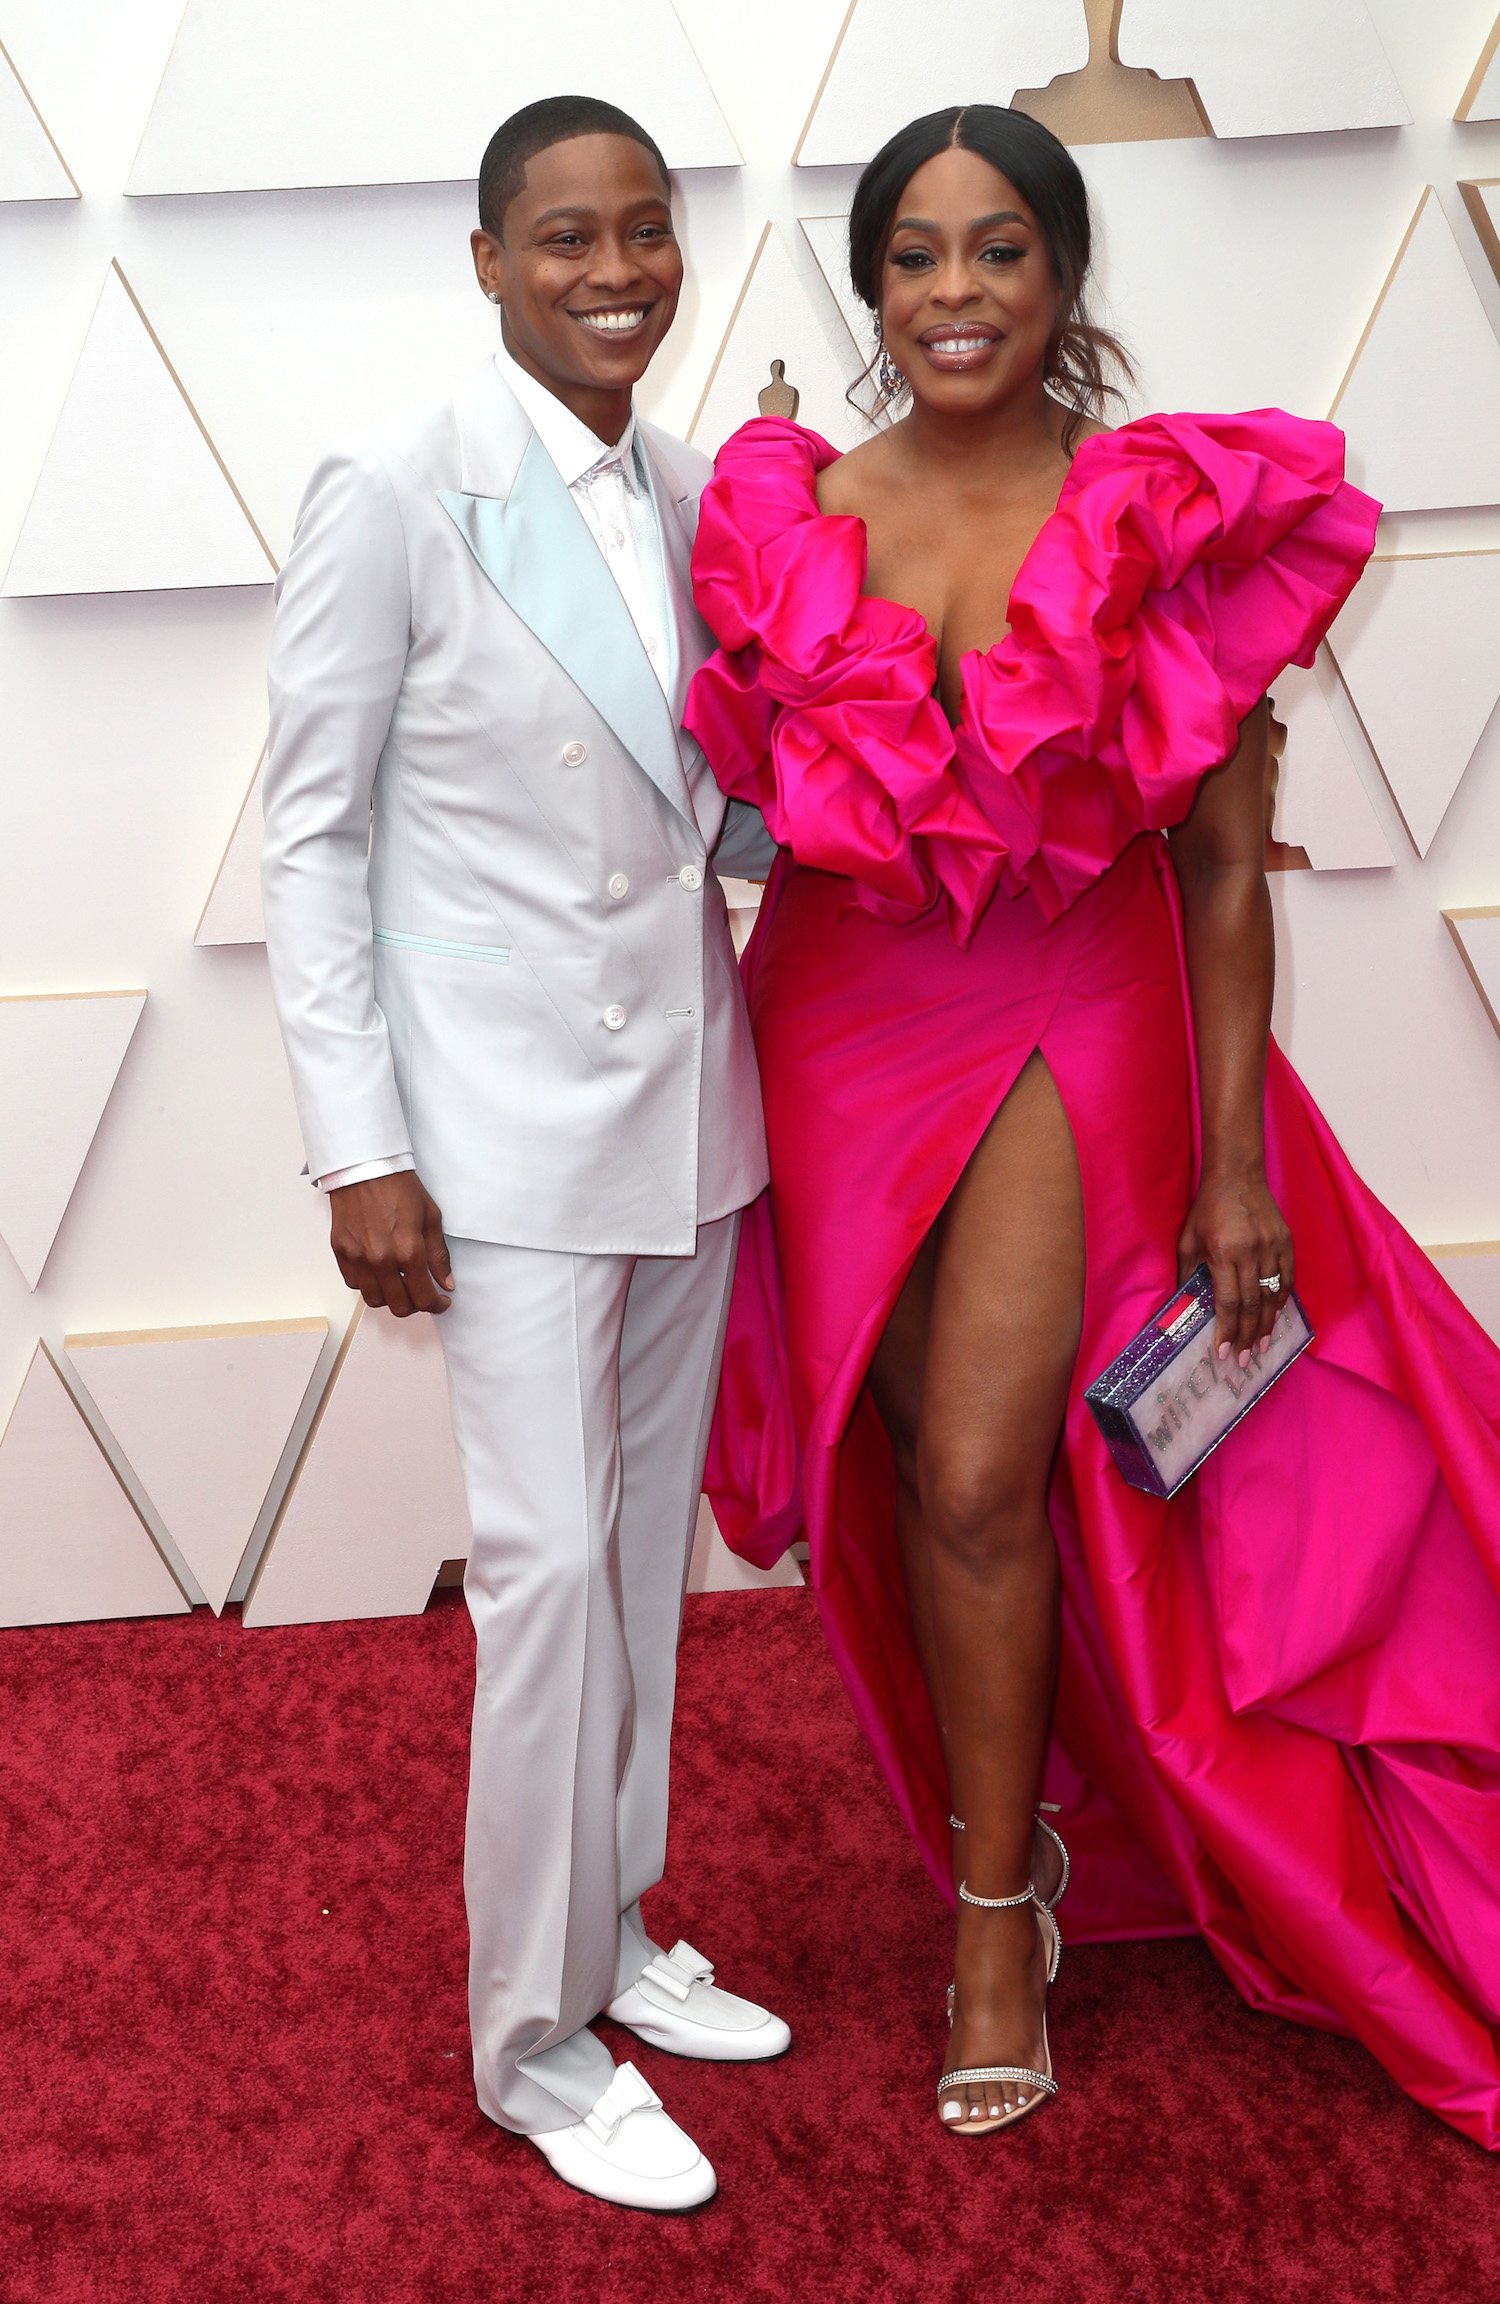 Jessica Betts and Niecy Nash at the Oscars 2022